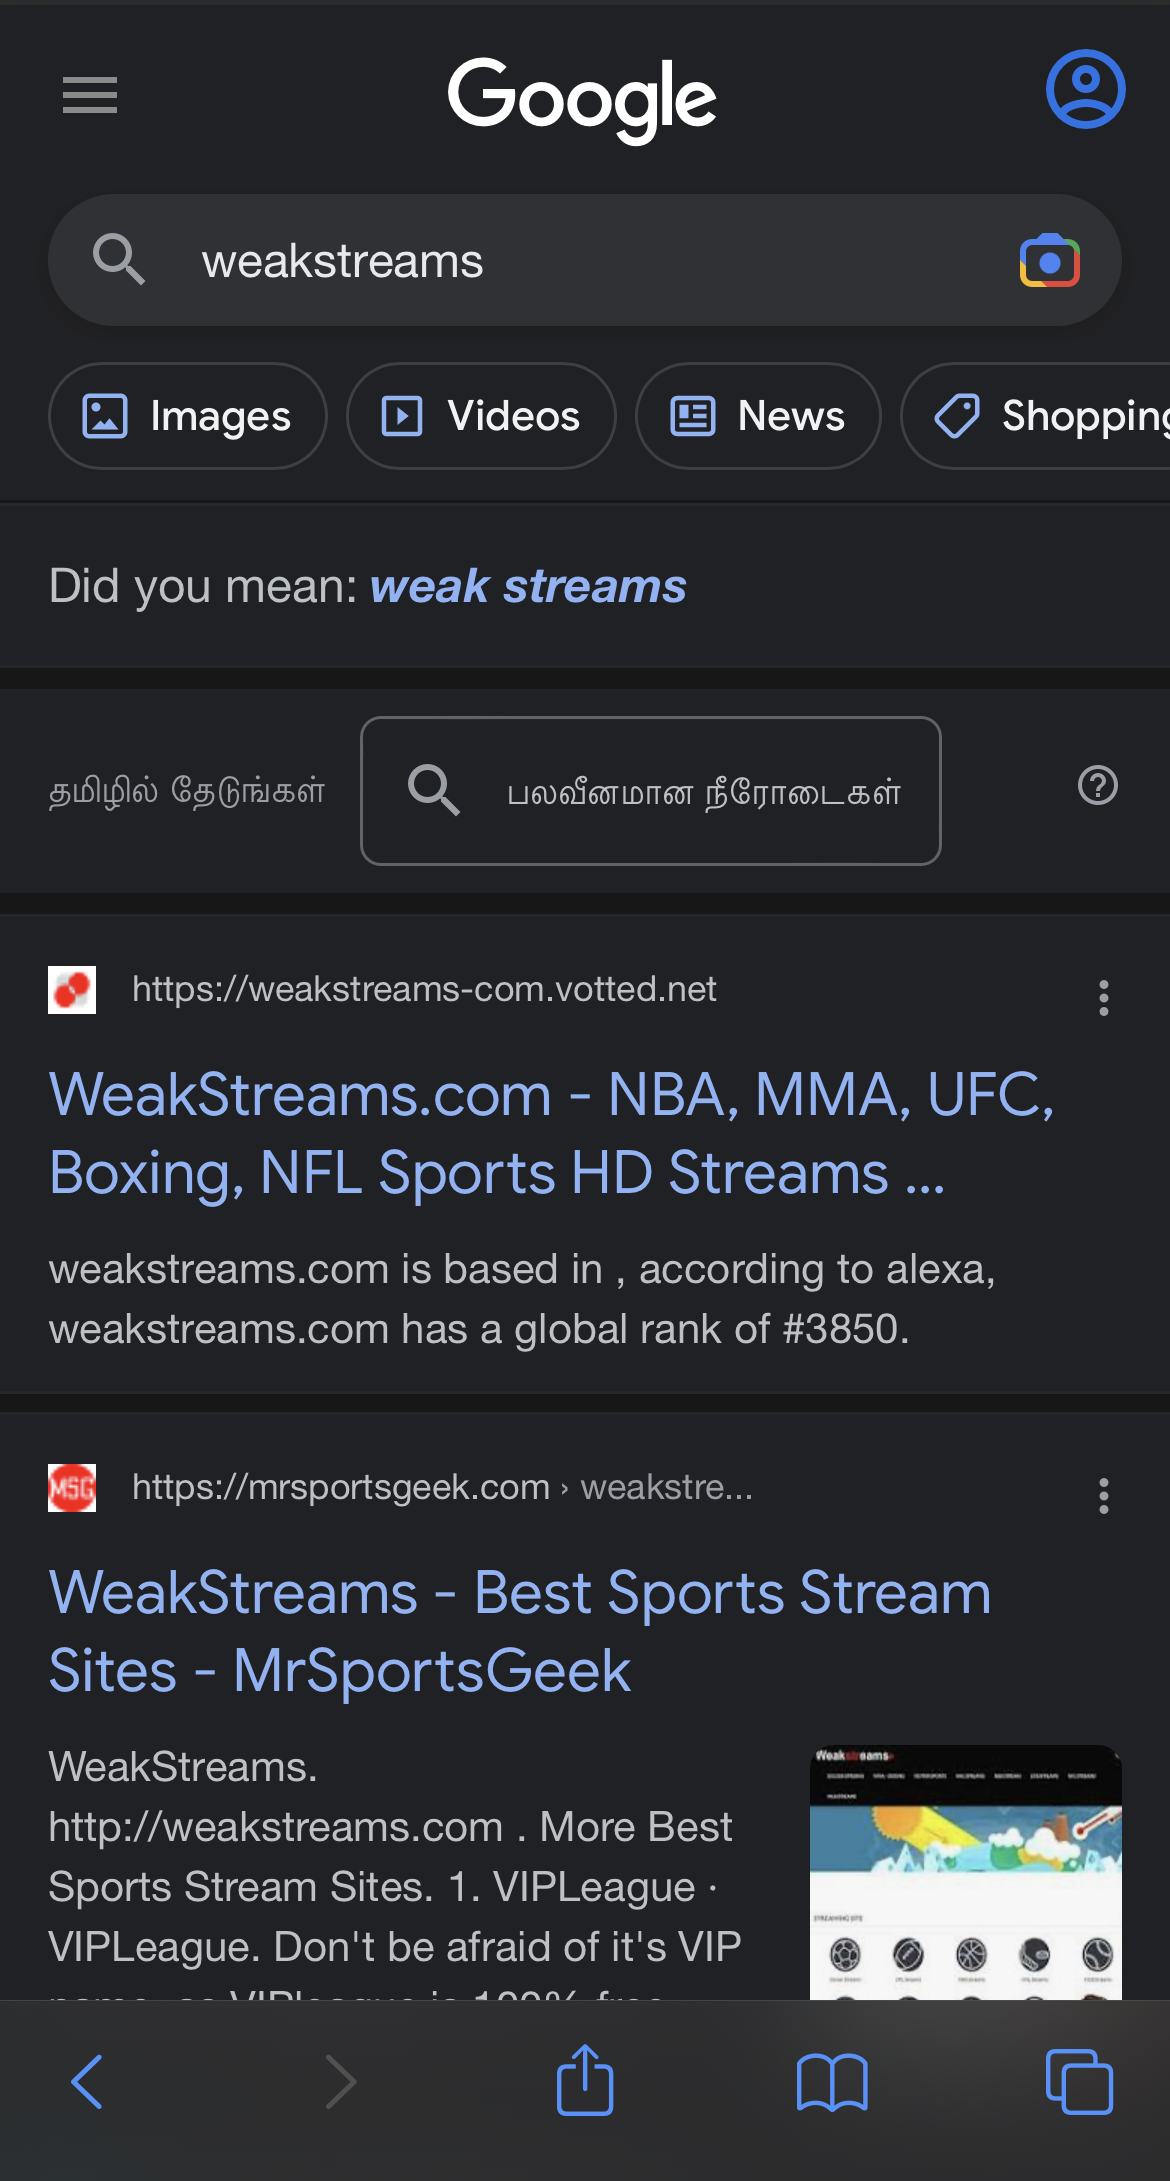 Select official Weakstreams website to stream